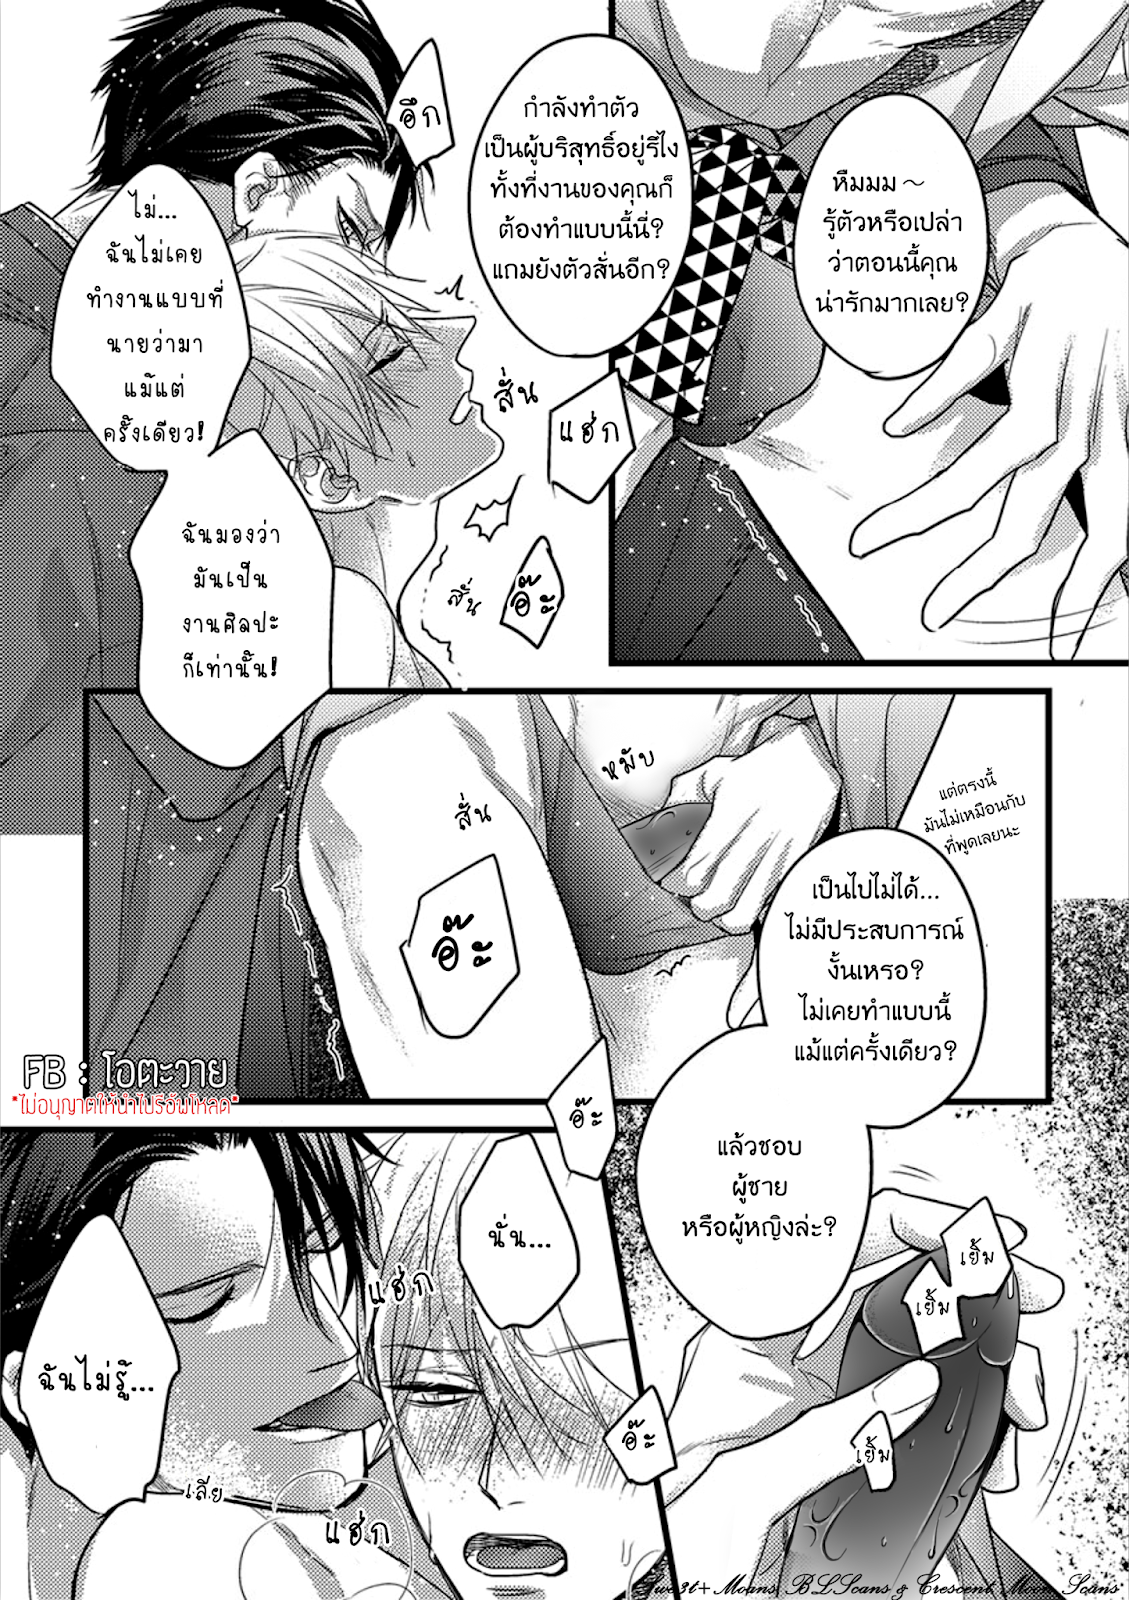 KISS AND NIGHT 0 29